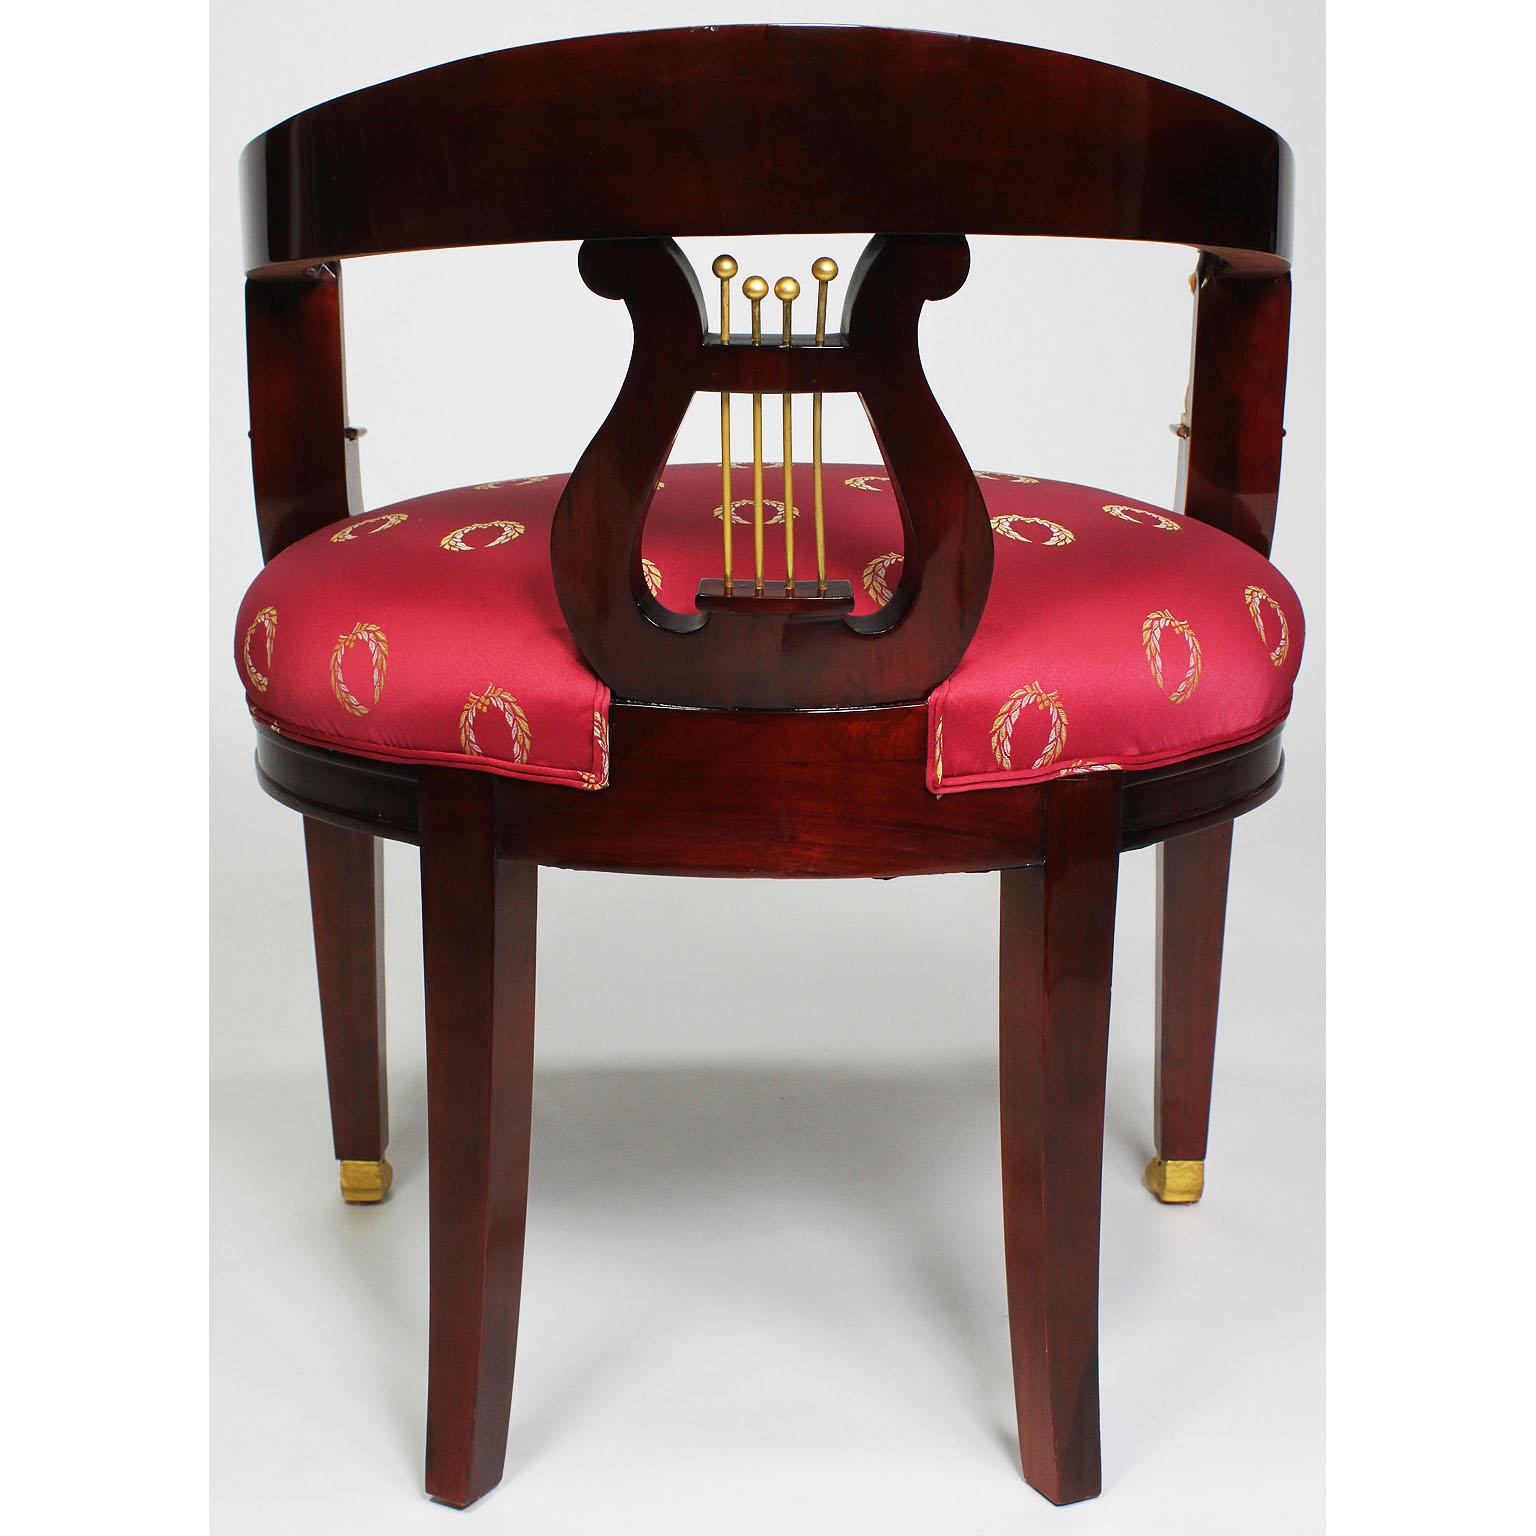 A Pair of French Empire Revival Style Mahogany & Gilt-Bronze Mounted Game Chairs For Sale 4